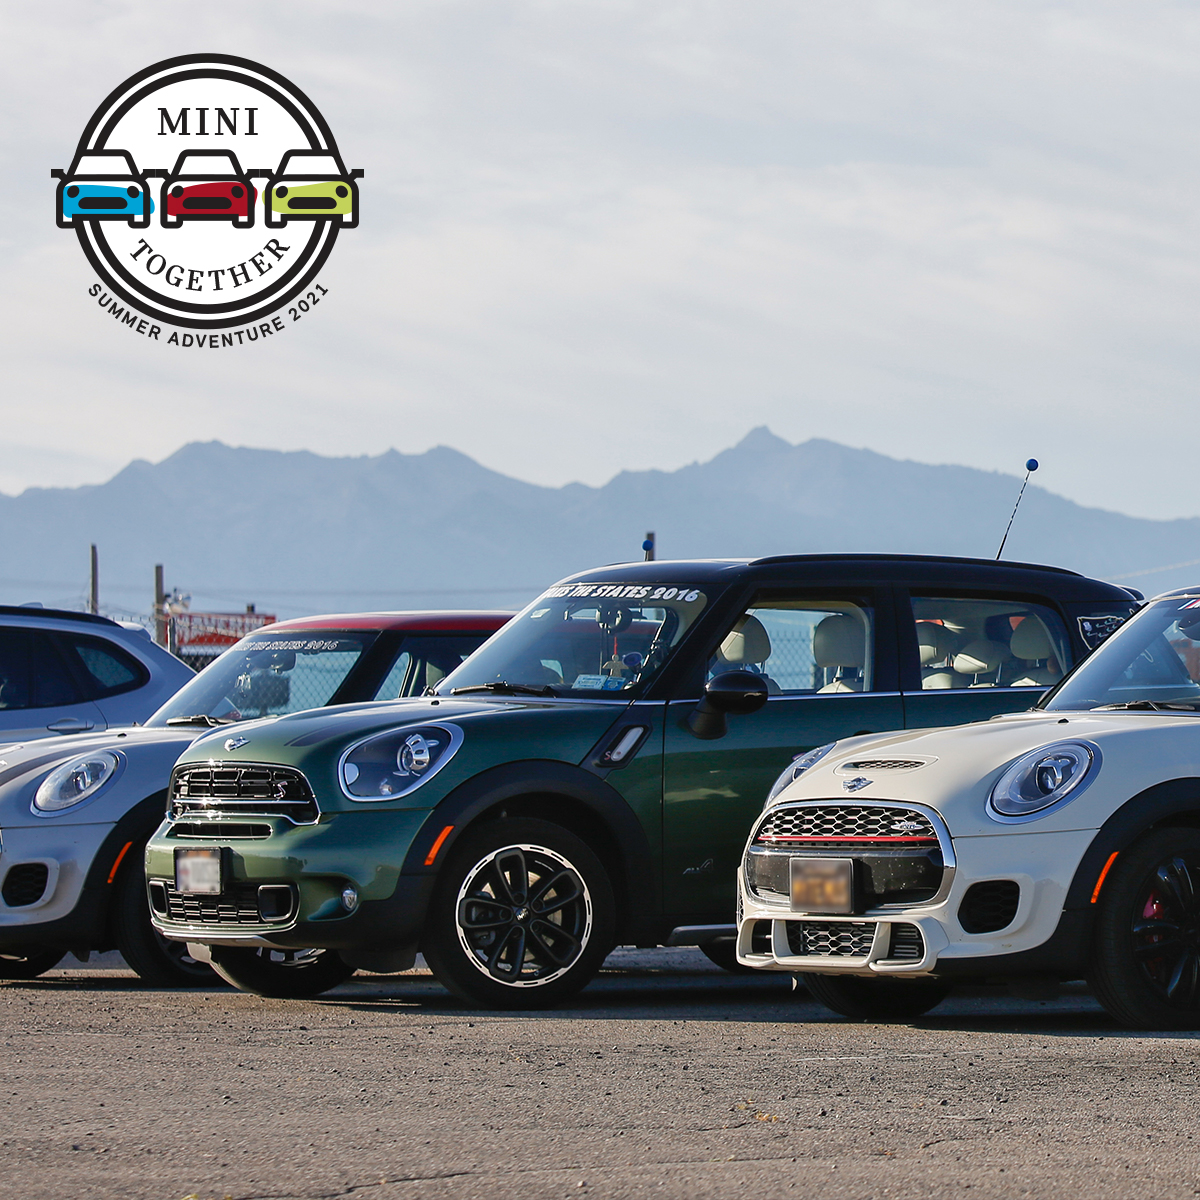 MINI Together National Day of Motoring Summer Adventure 2021